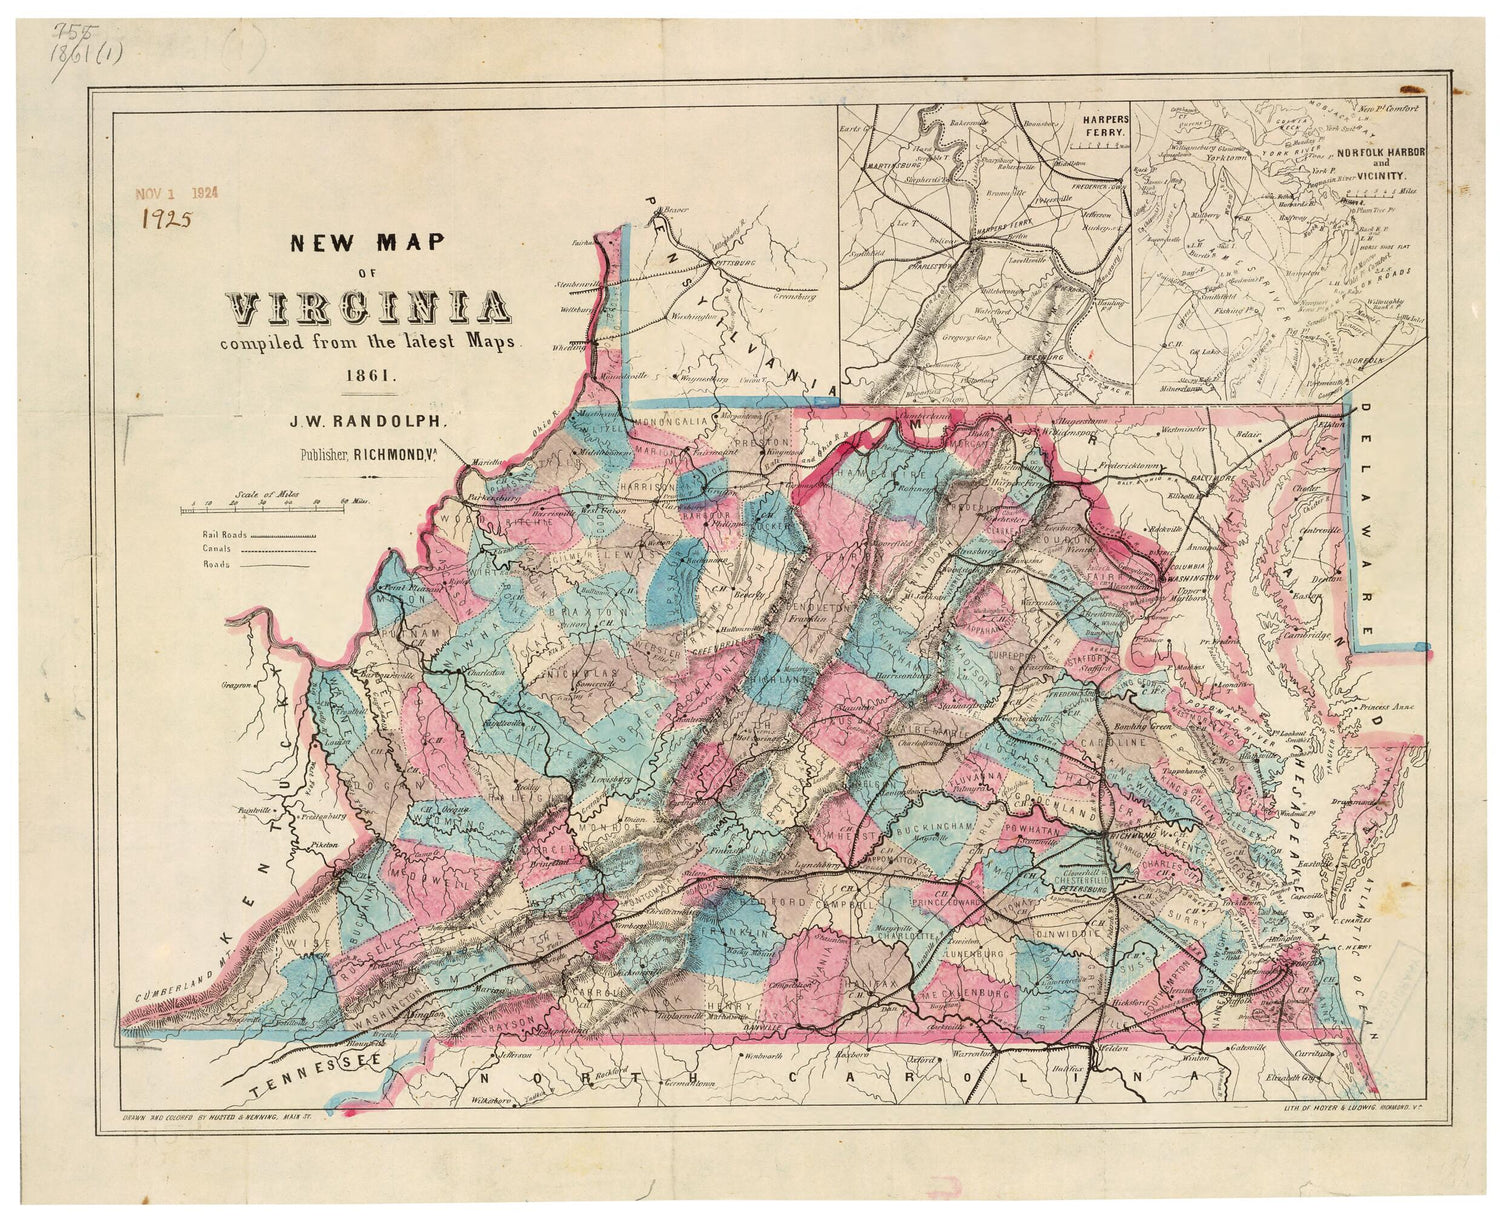 This old map of New Map of Virginia : Compiled from the Latest Maps from 1861 was created by  Harper &amp; Ludwig,  Husted &amp; Nenning,  J.W. Randolph &amp; Co. in 1861